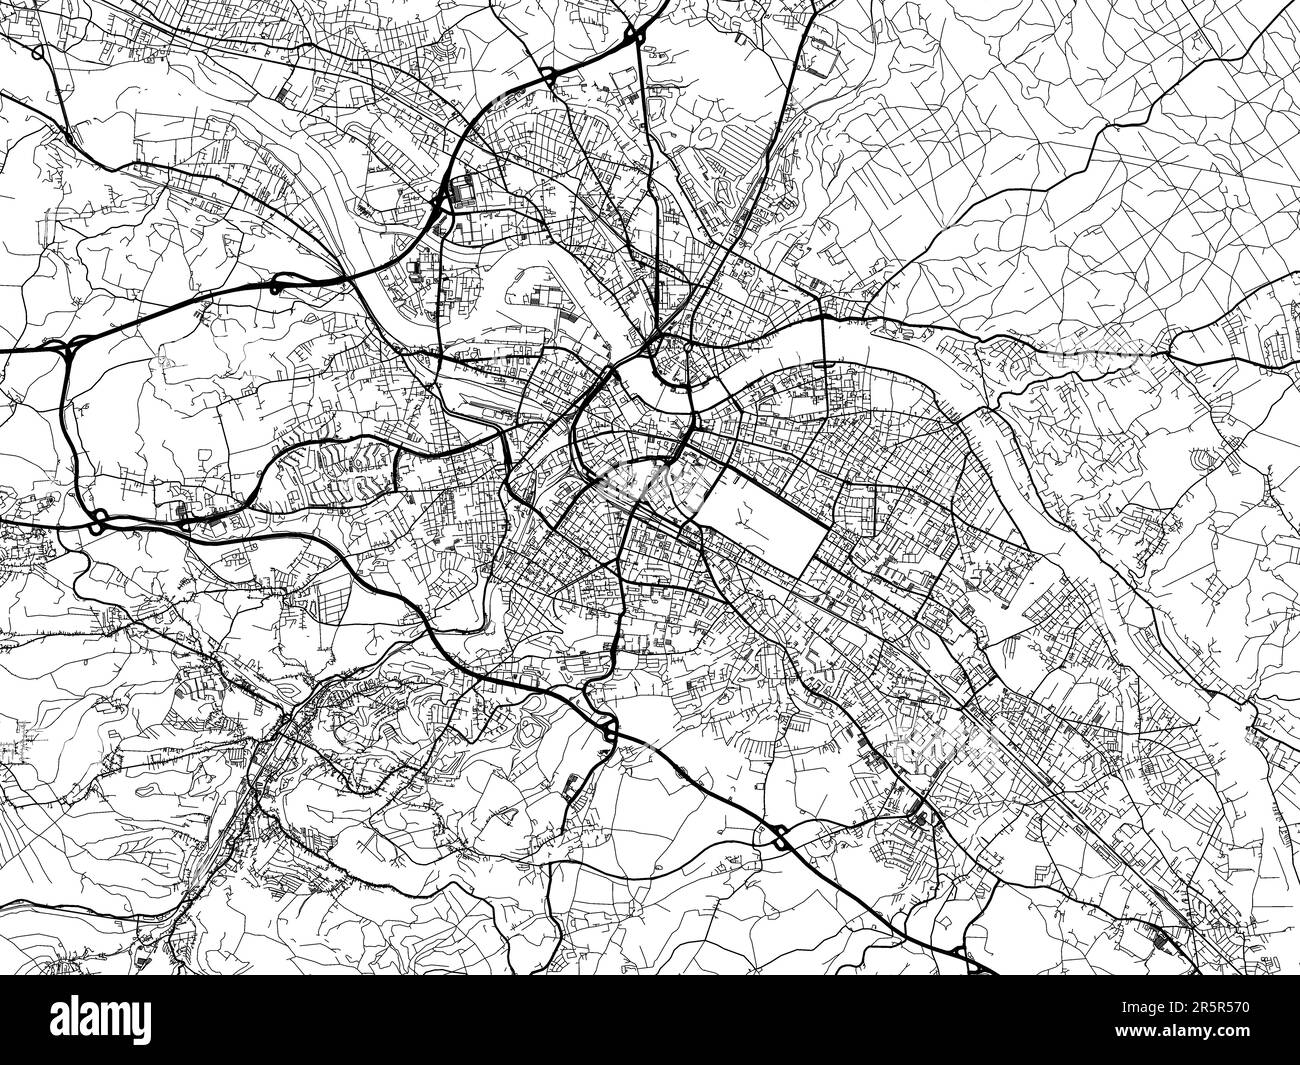 Vector road map of the city of  Dresden in Germany on a white background. Stock Photo